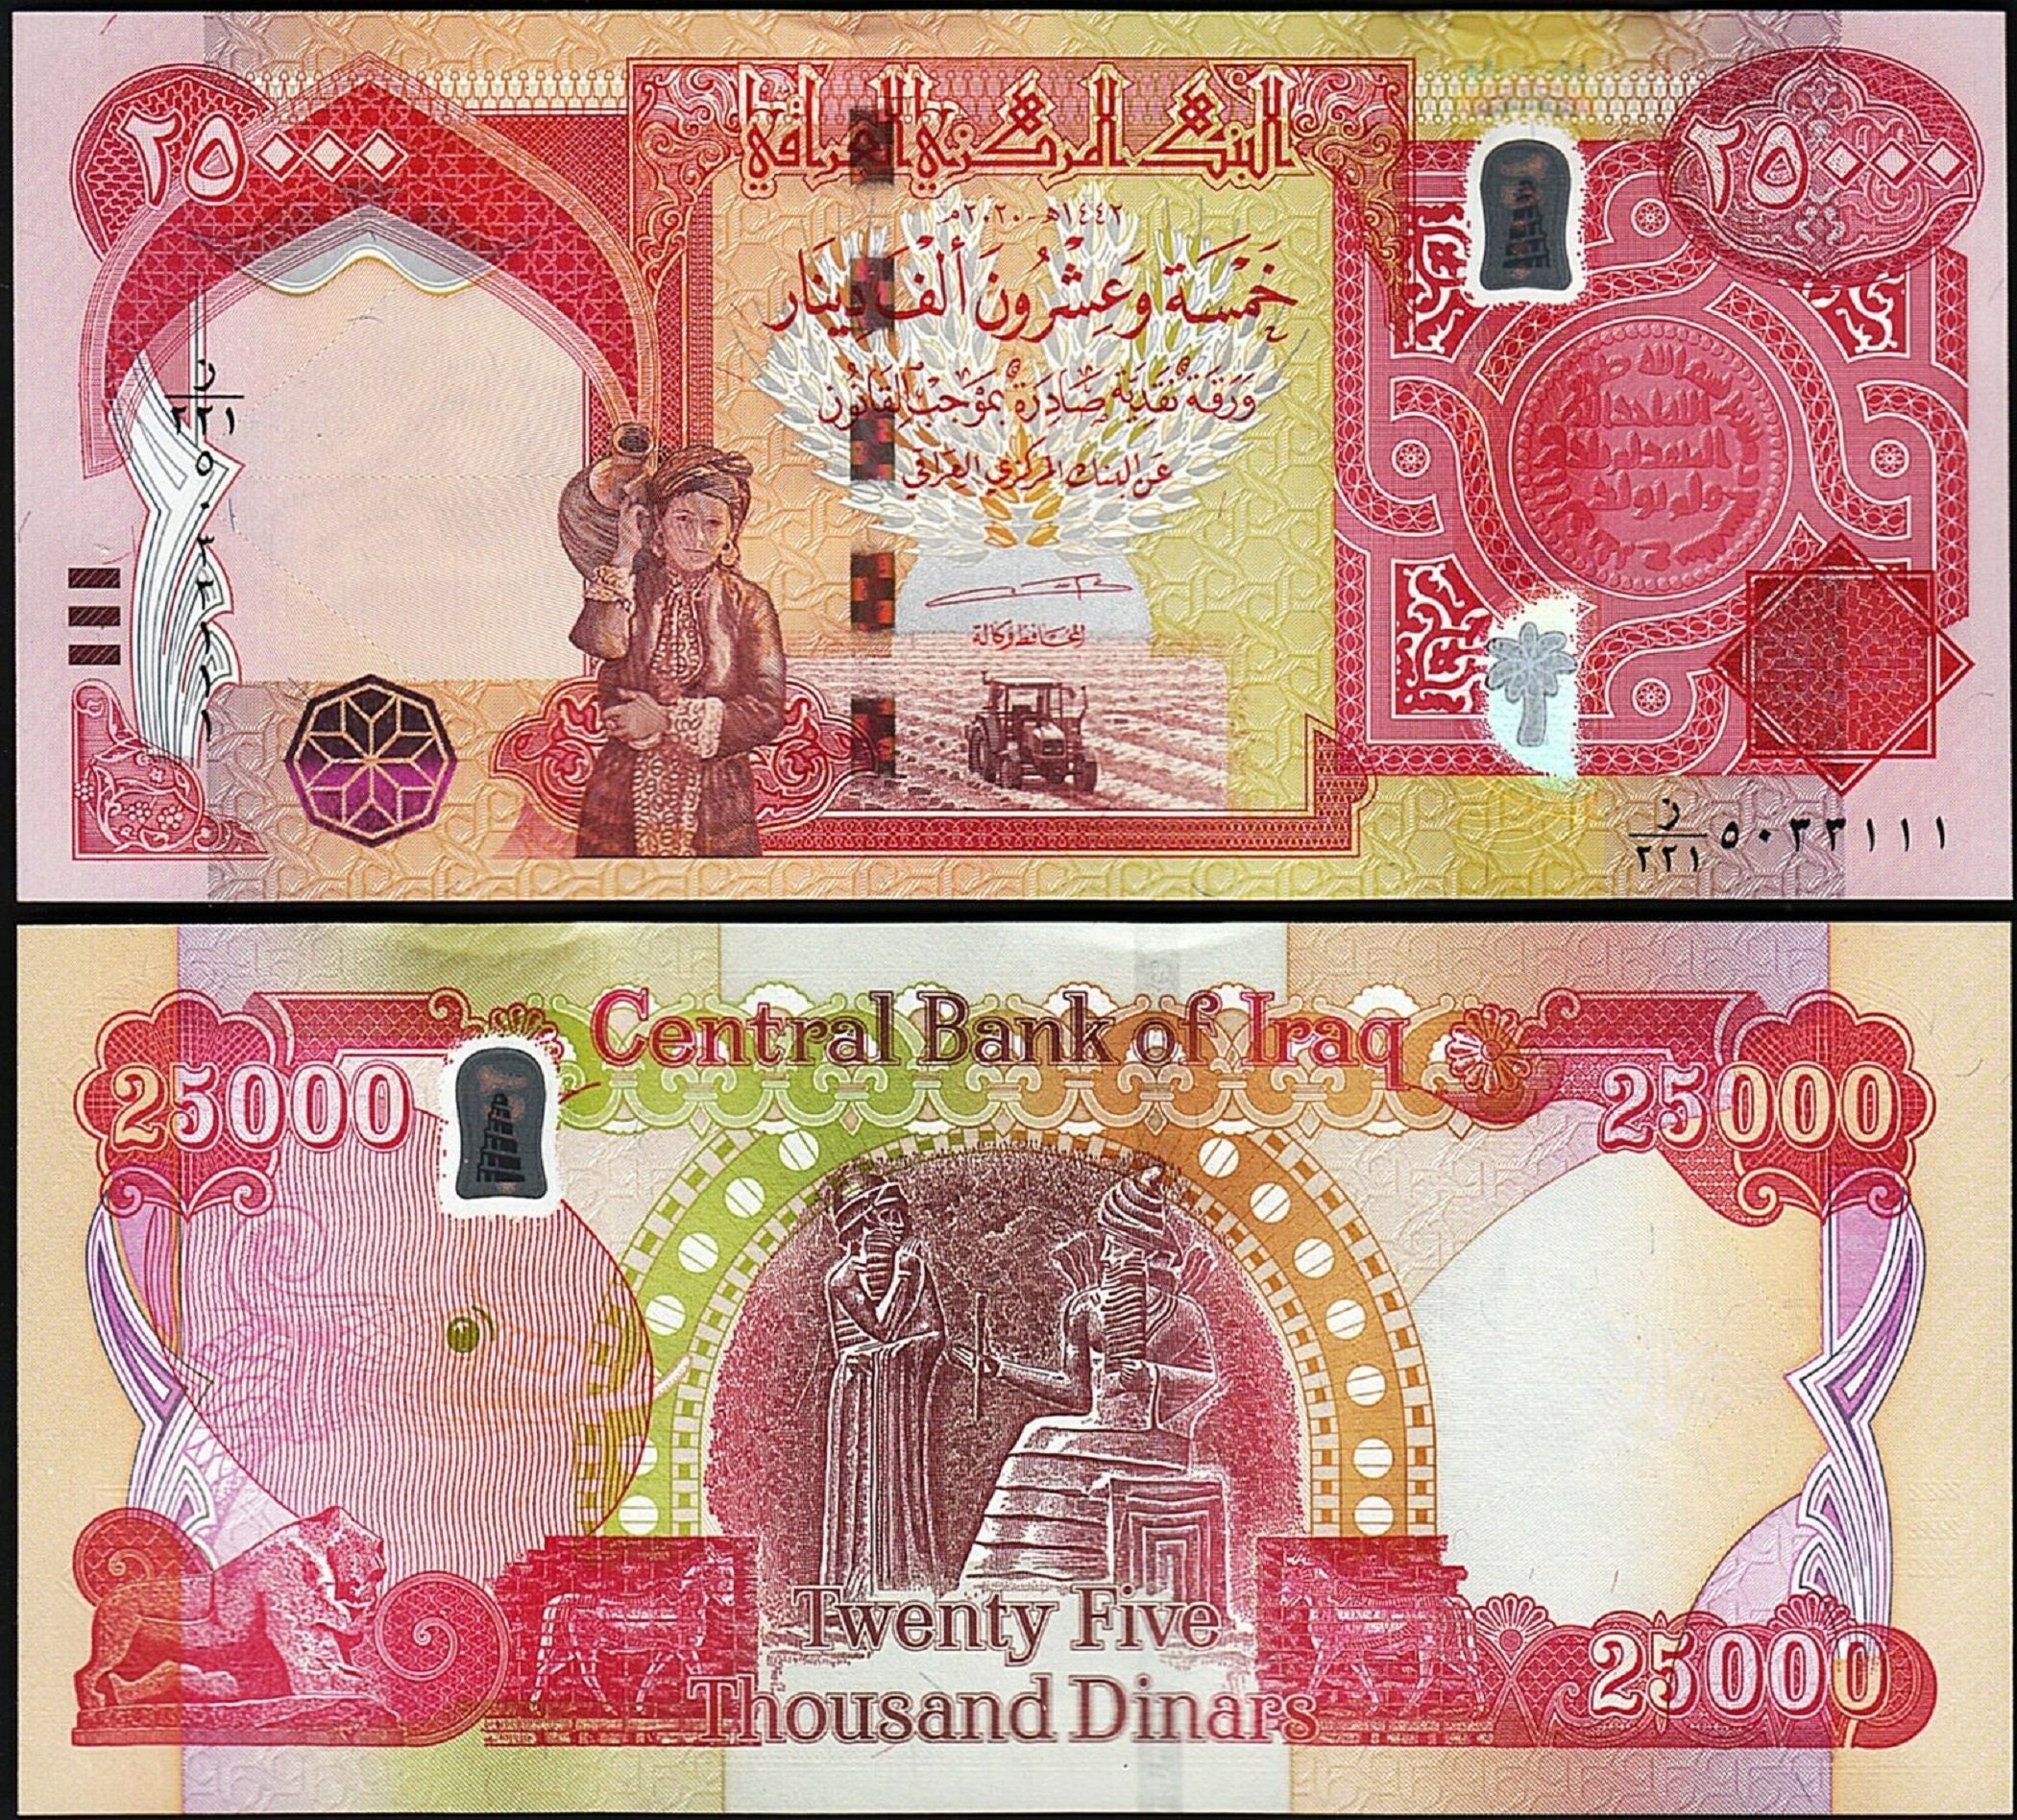 Lot of 10 UNCIRCULATED Iraq Iraqi 25000 Dinar Notes 250,000 Dinar Total Currency 